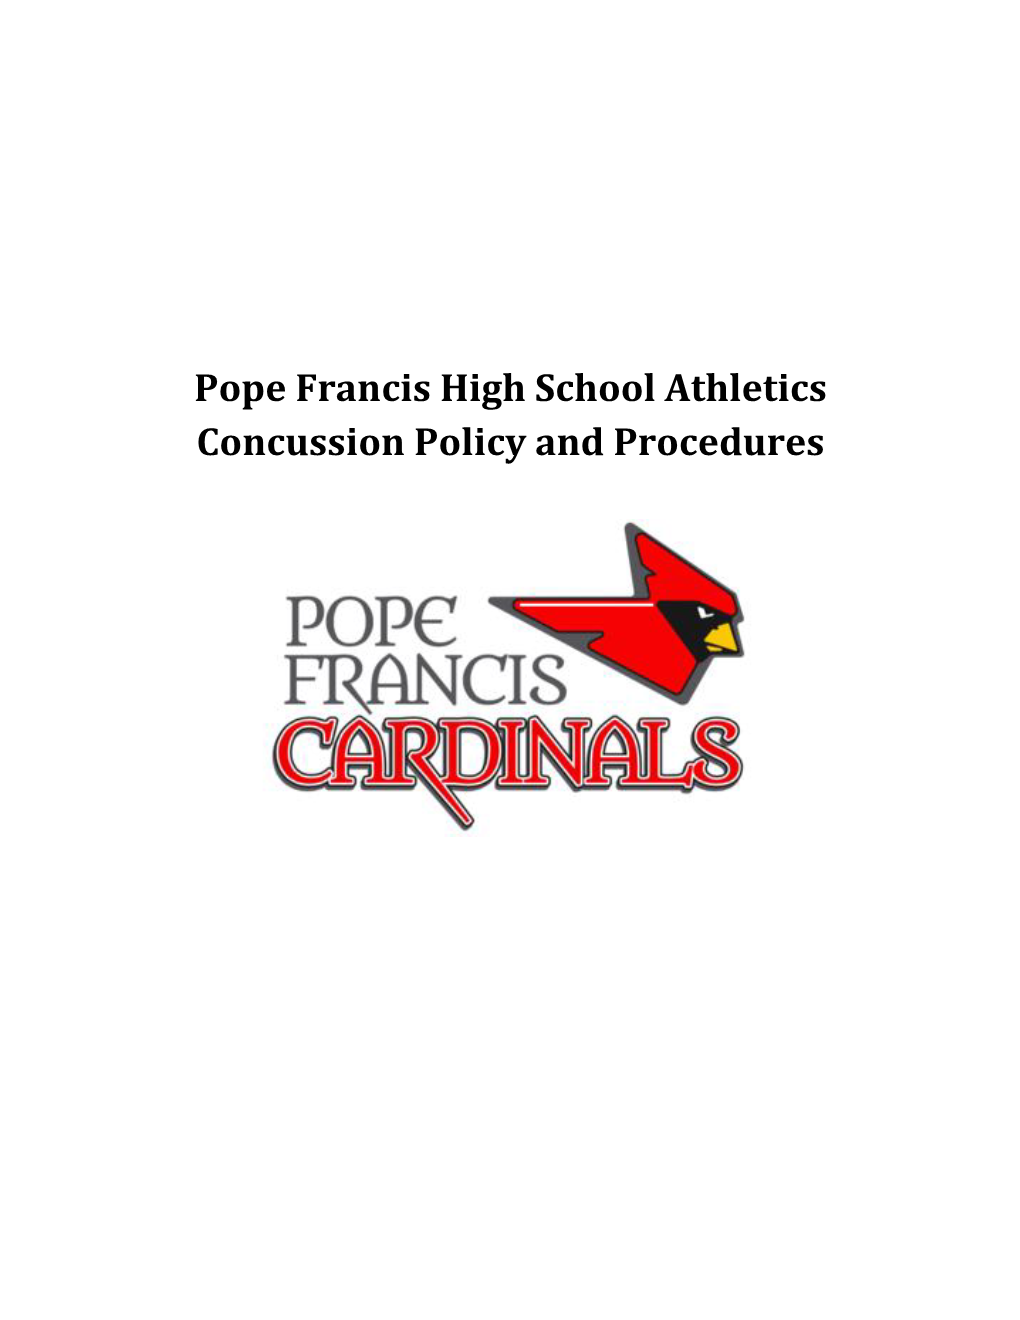 Pope Francis High School Athletics Concussion Policy and Procedures